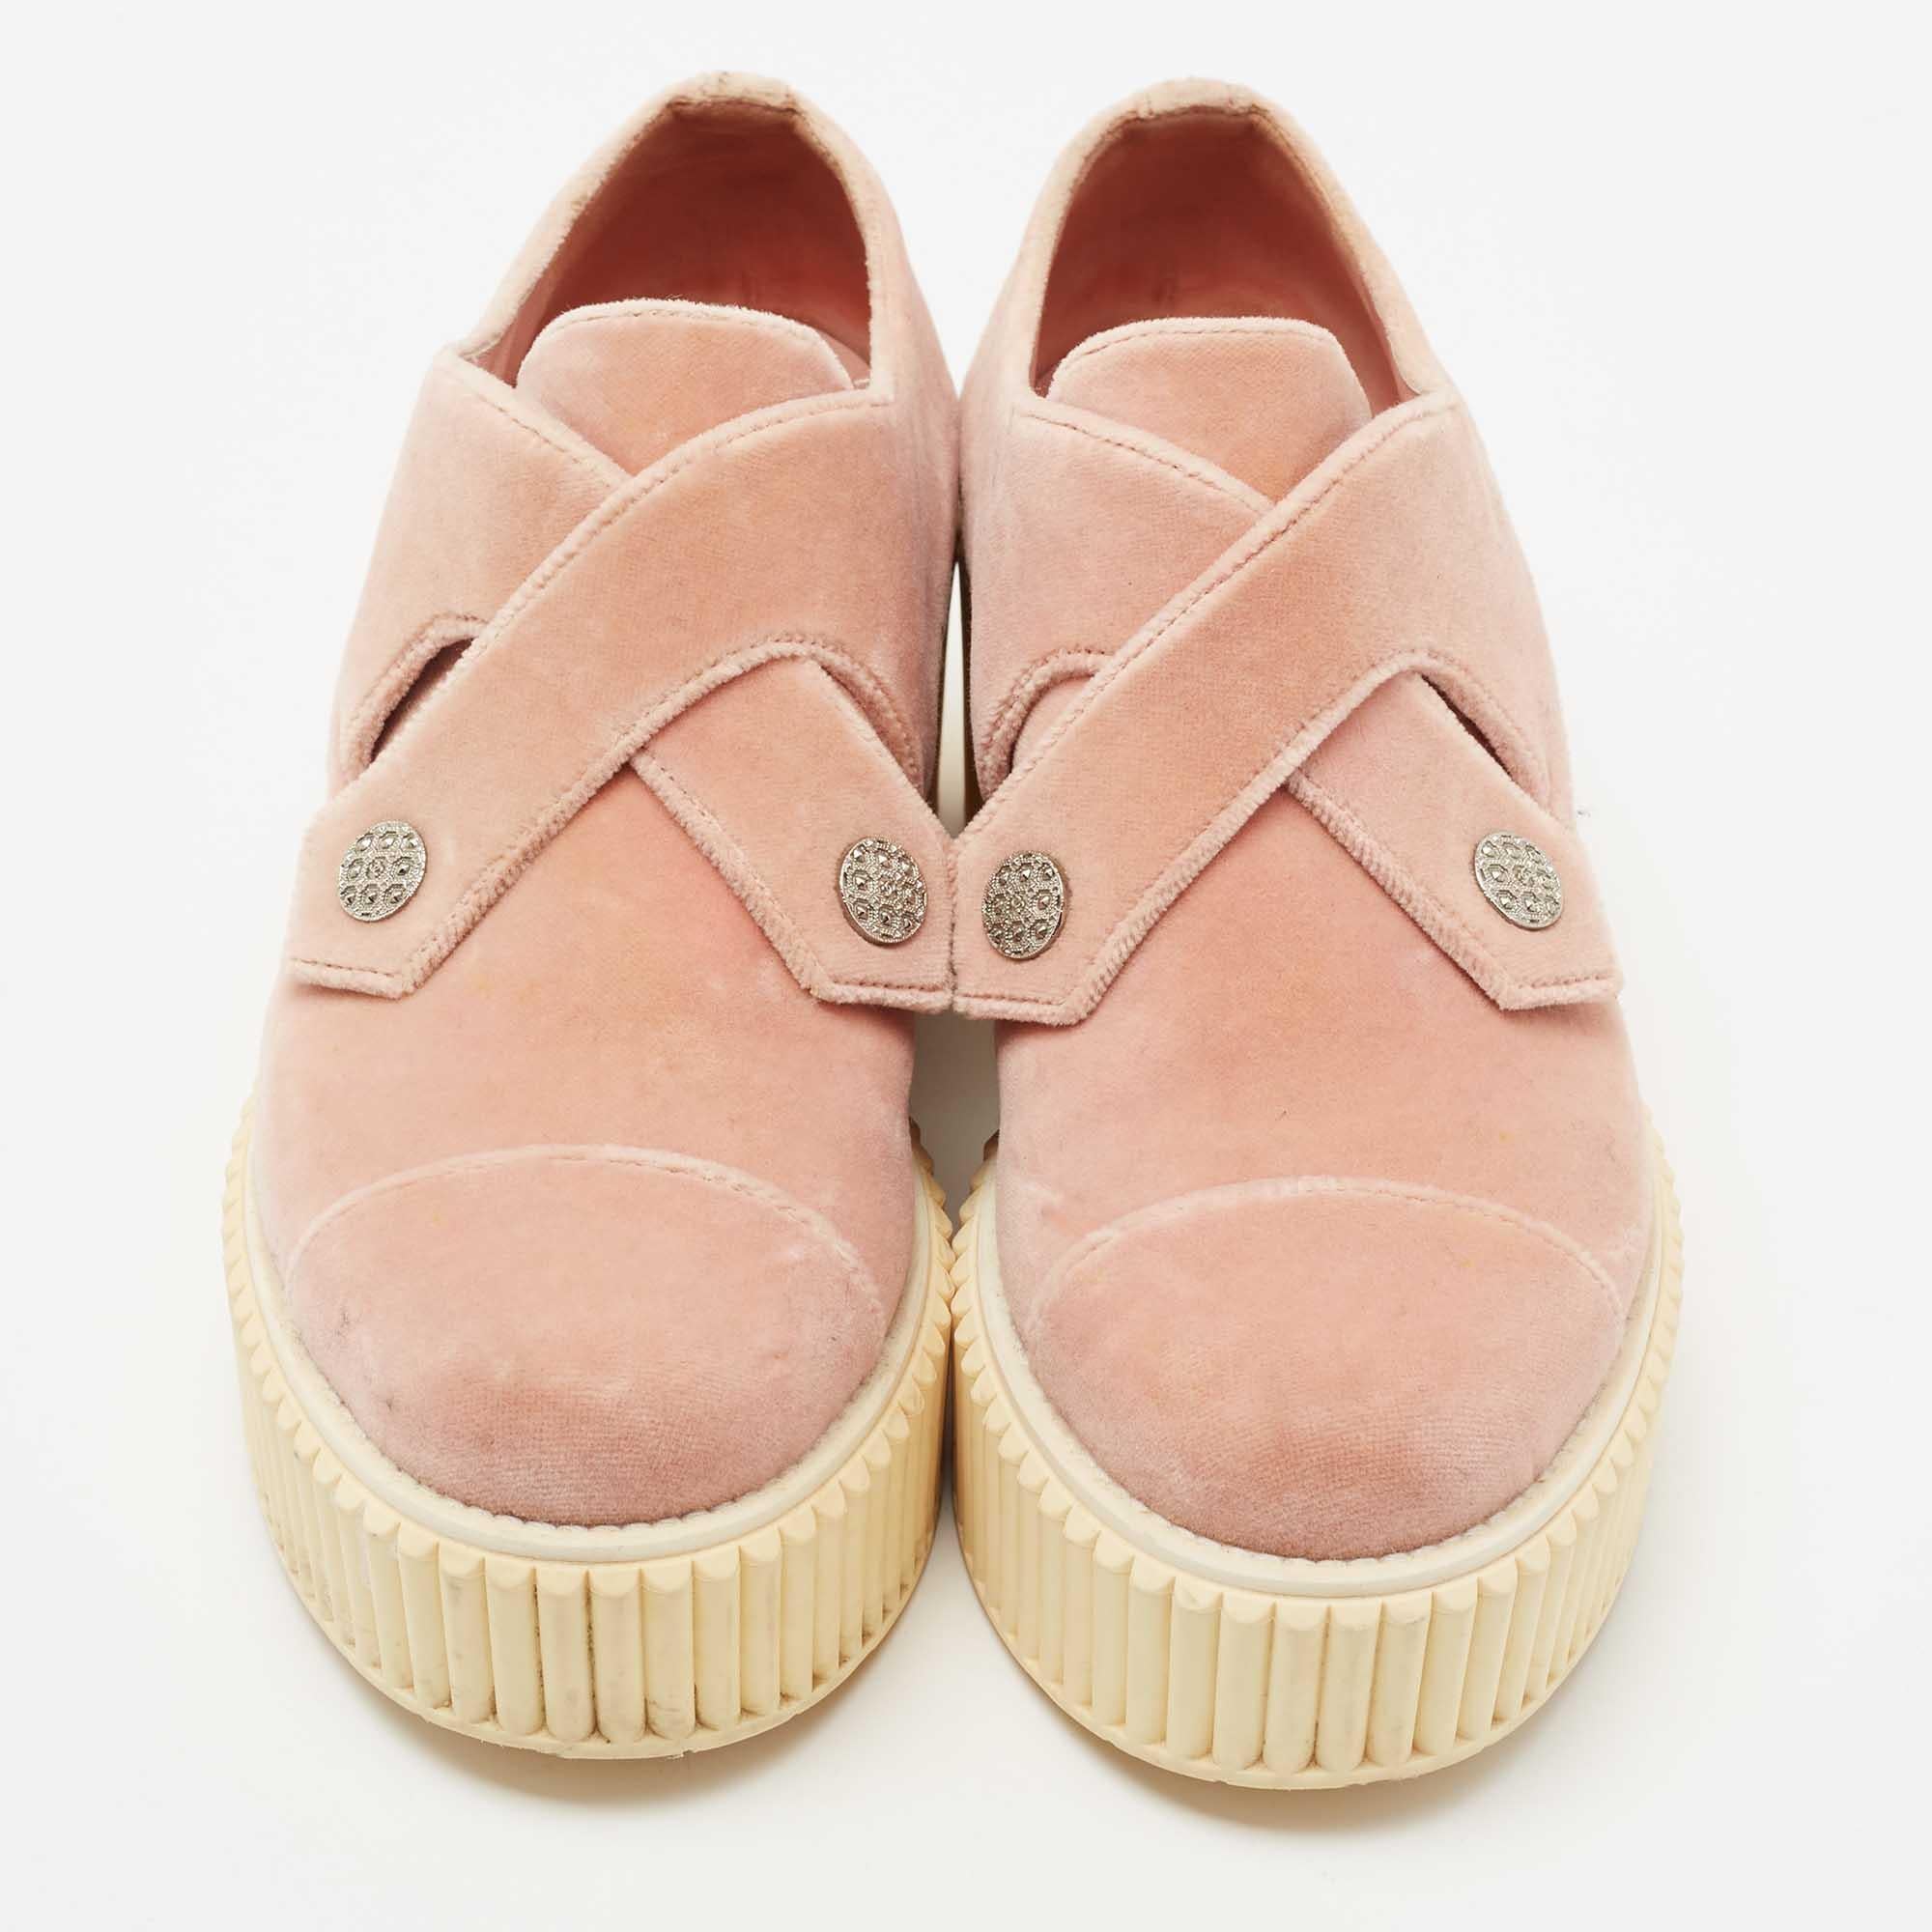 A blend of high style and bold simplicity, these uber-chic platform sneakers from Chanel will perfectly complement your casual ensemble. Displaying a pretty pink exterior, the sneakers are crafted from velvet. They are complete with silver-tone